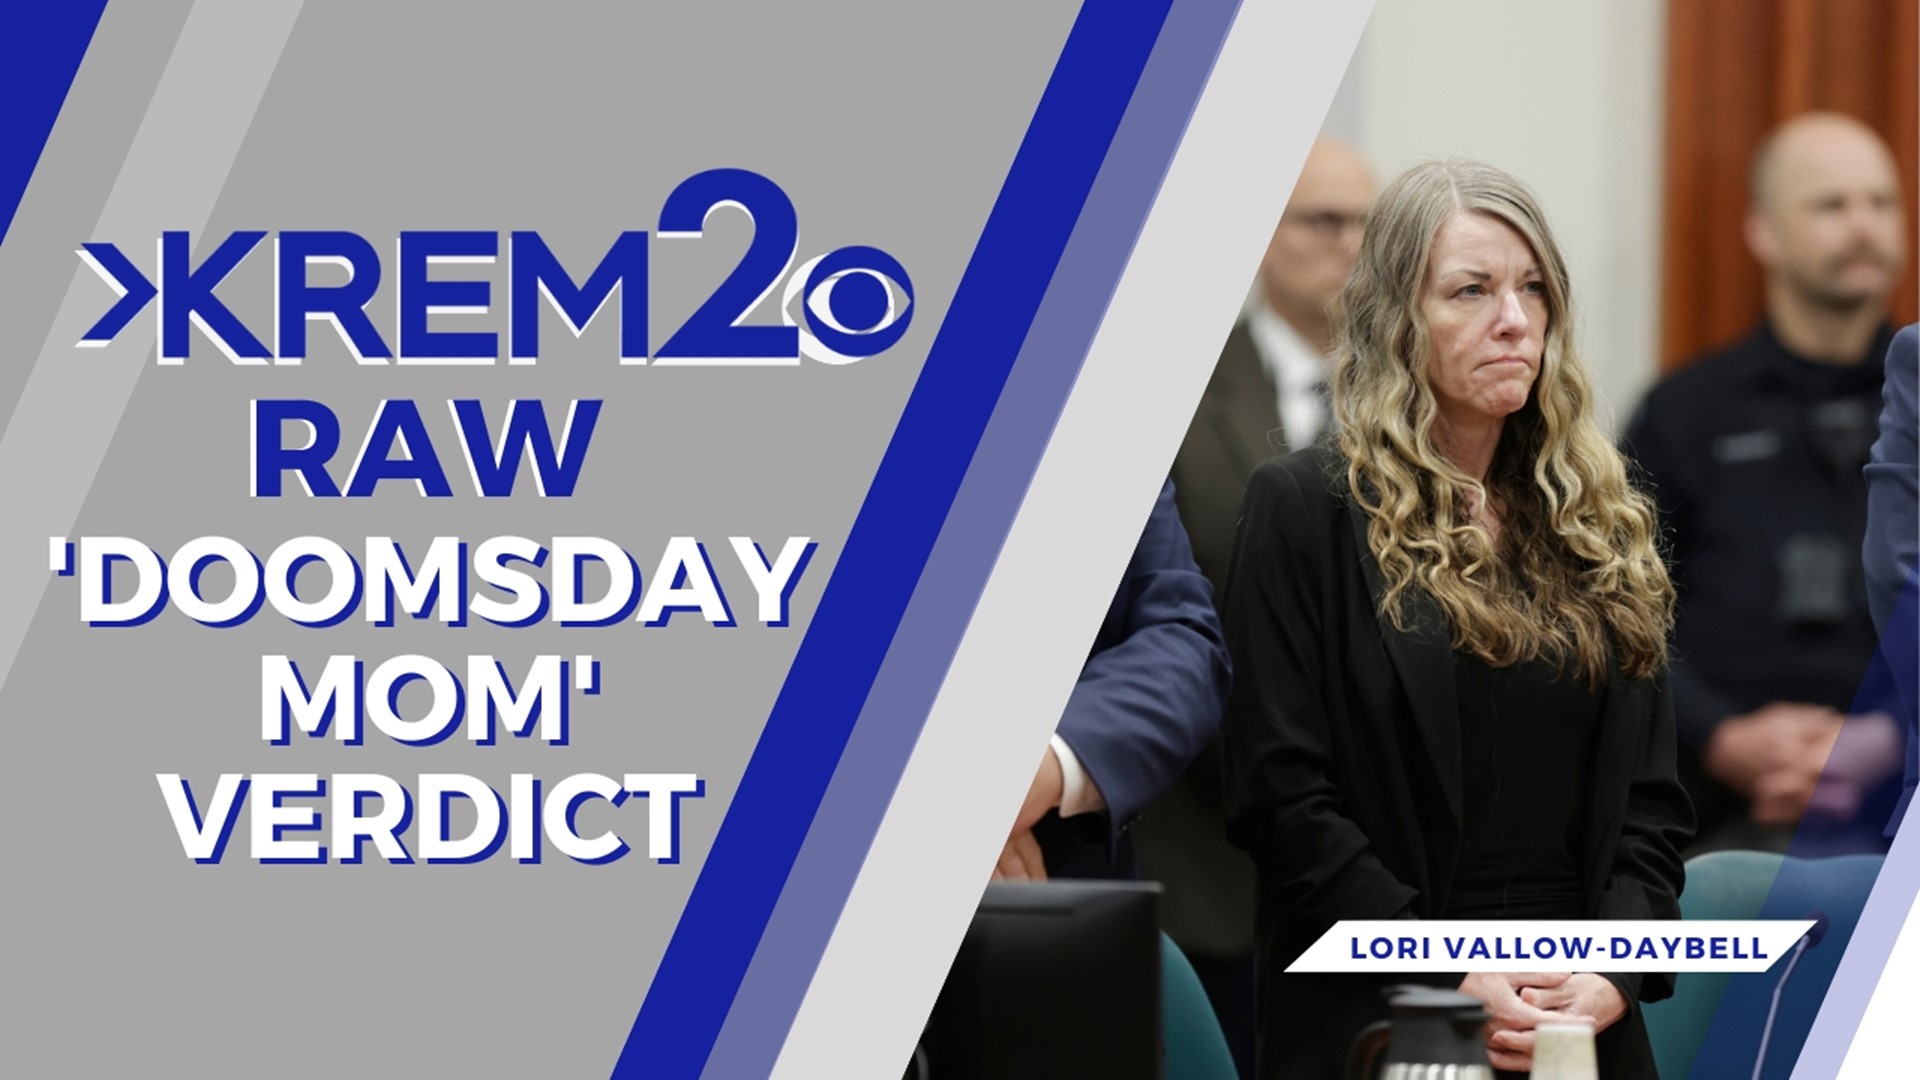 Lori Vallow was convicted of murder, conspiracy to commit murder and grand theft in connection to the deaths of two of her children, JJ Vallow and Tylee Ryan